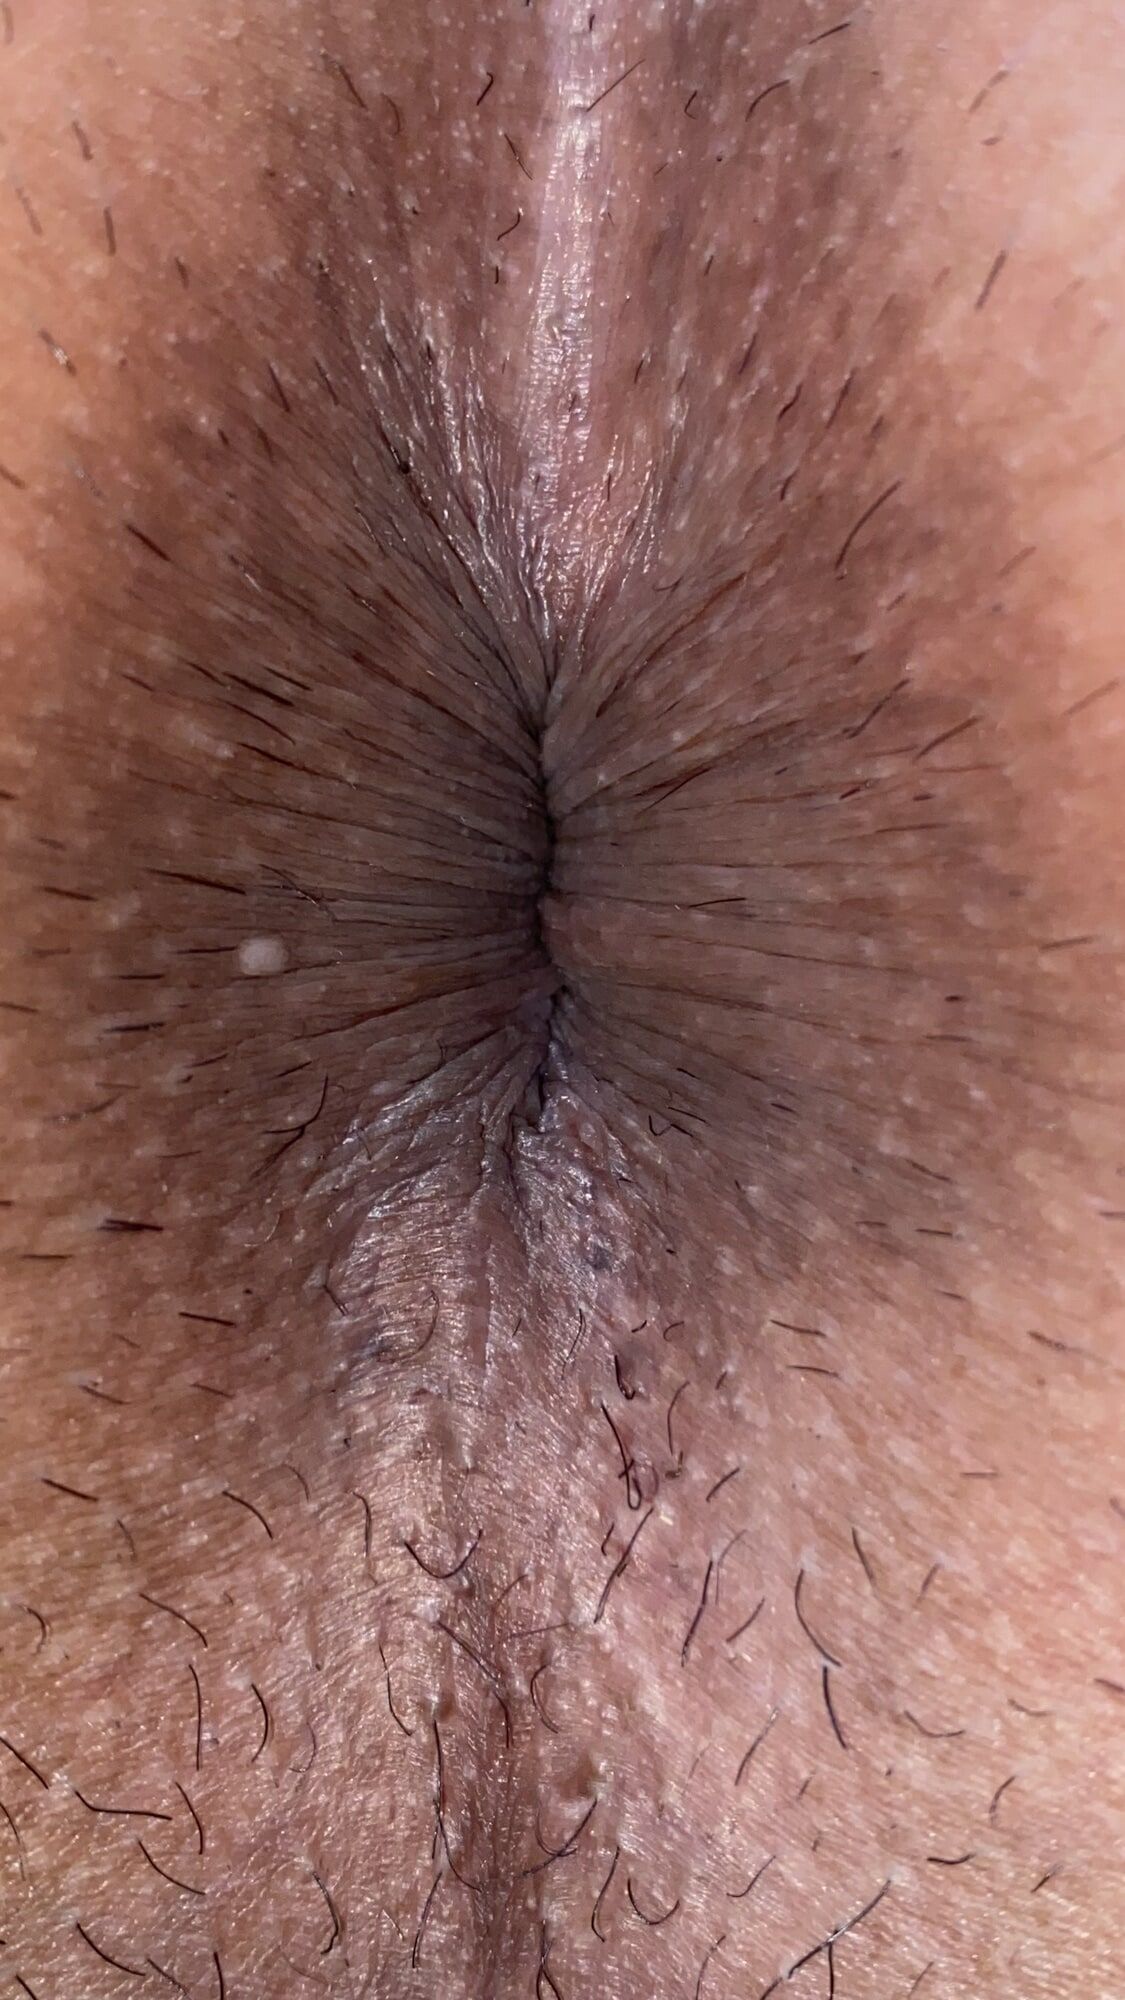 An image of my anus that is clear to every single wrinkle #58